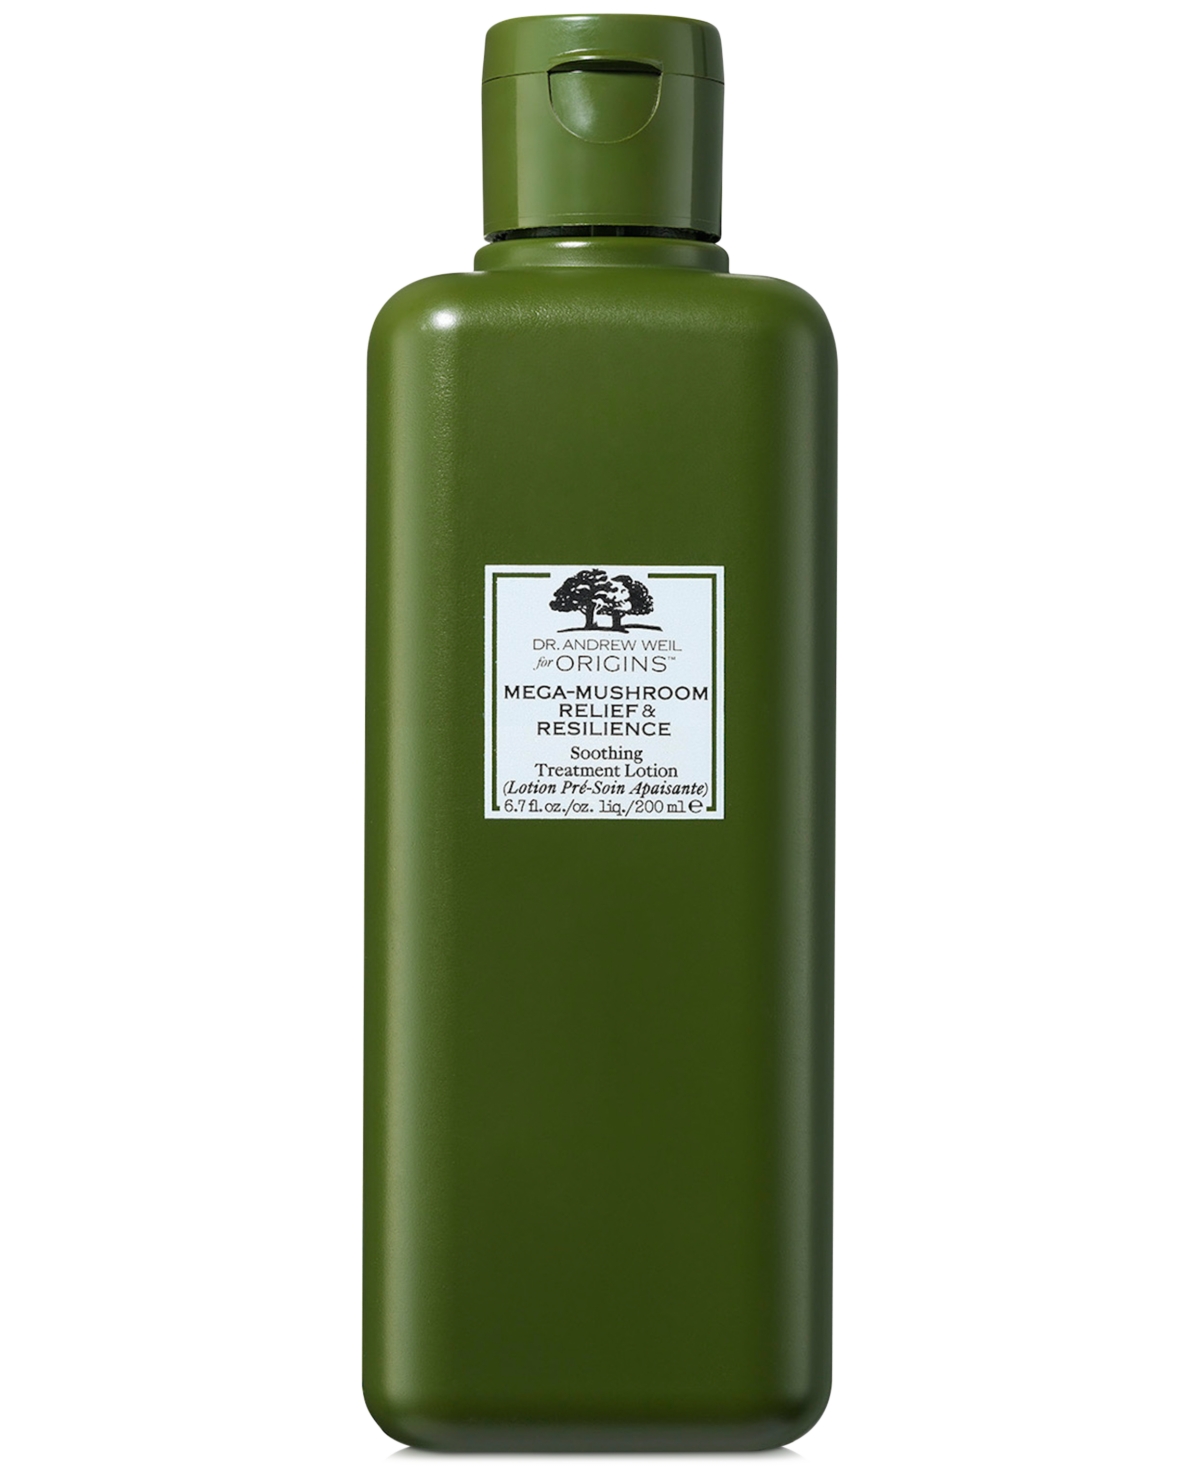 Dr. Andrew Weil for Origins Mega-Mushroom Relief & Resilience Soothing Treatment Lotion, 6.7 oz.